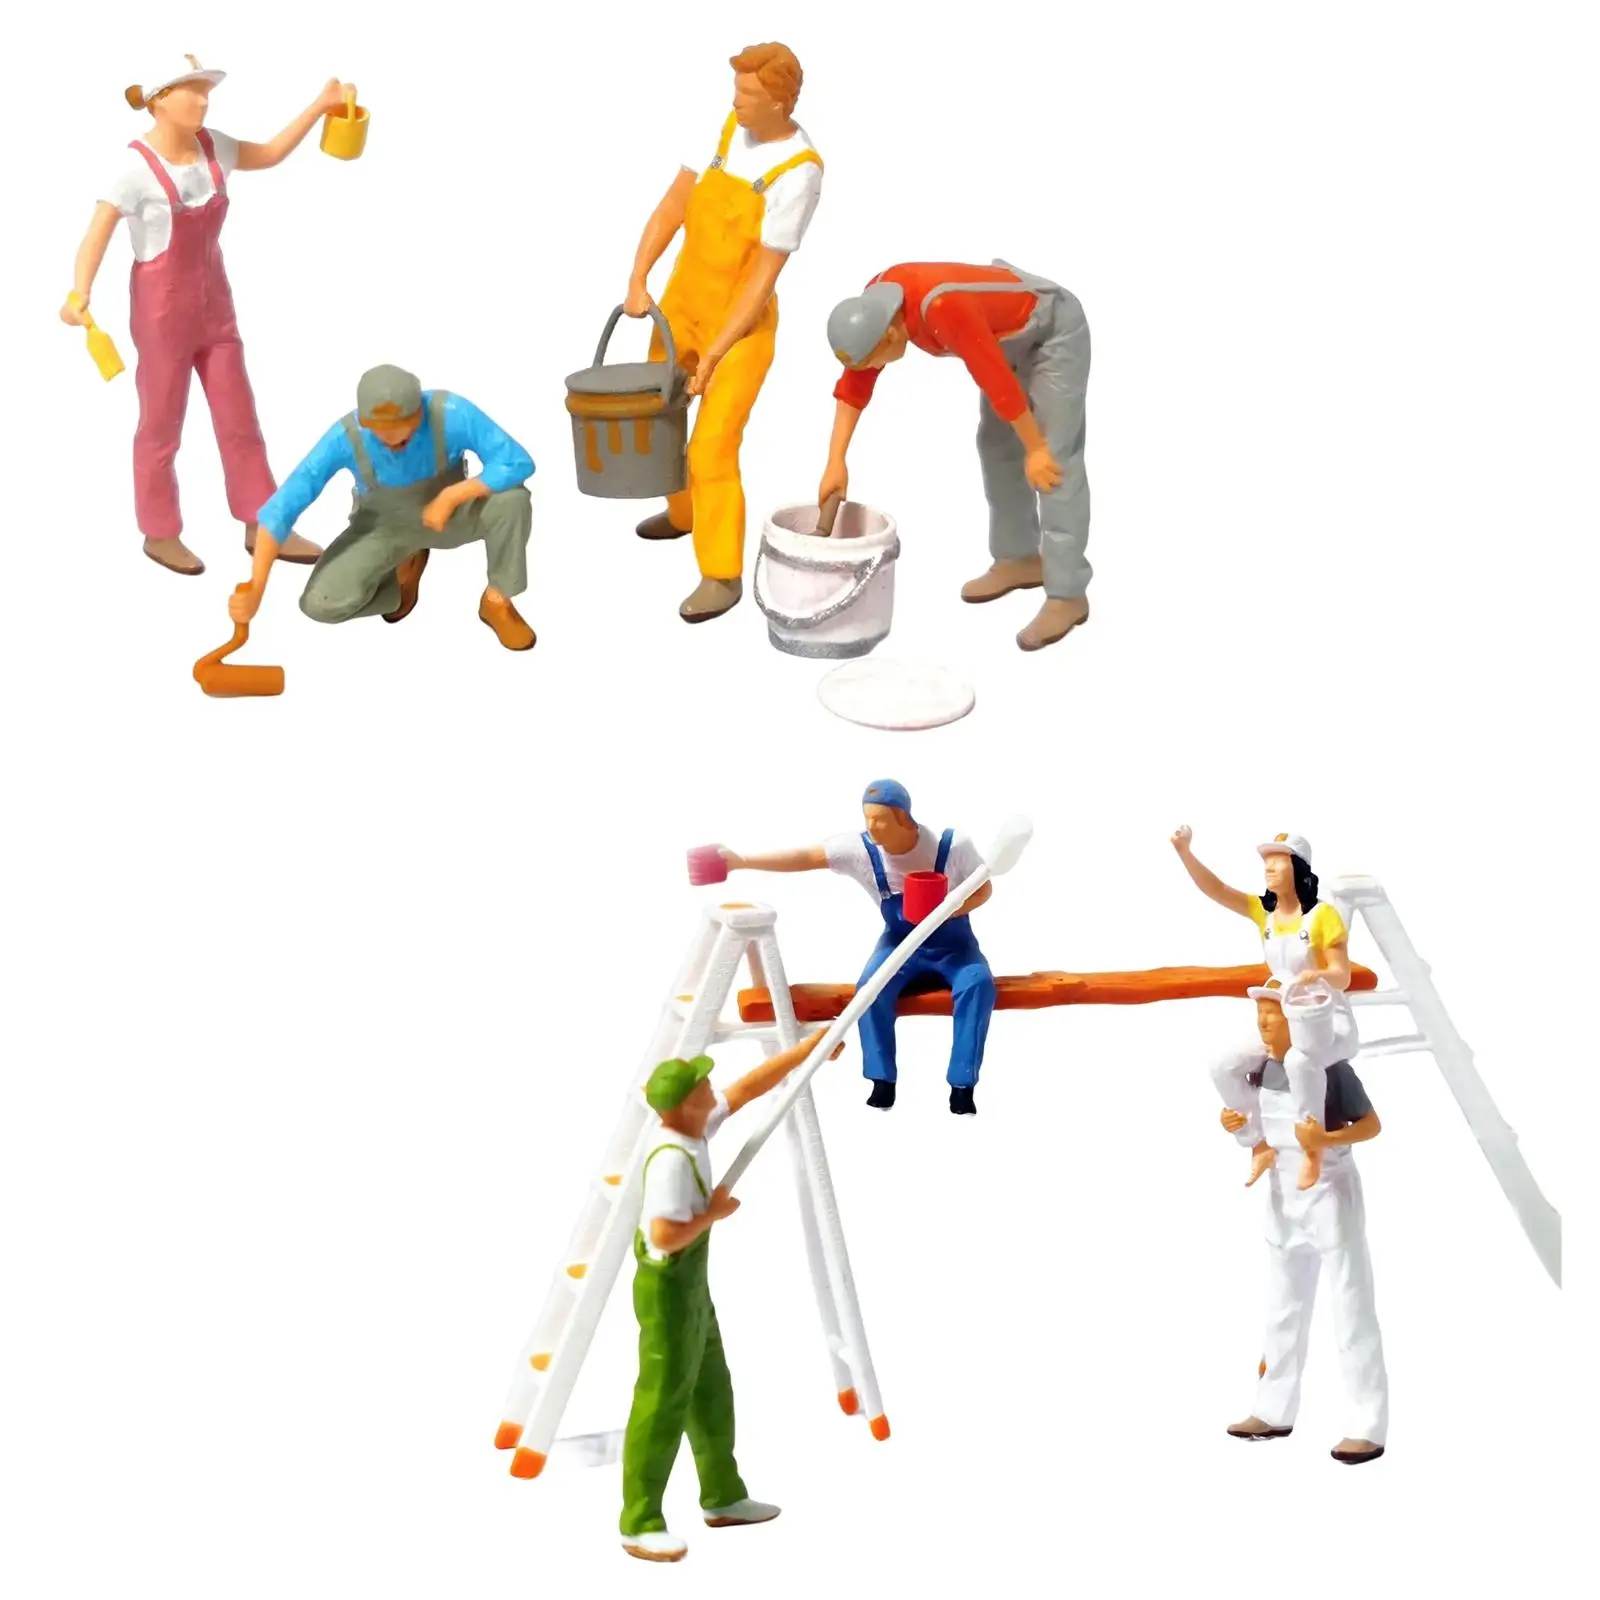  :87 Figure Decorator Tiny People Painting Scene for Model Train DIY Projects Layout Architecture Model  Table Building Kit